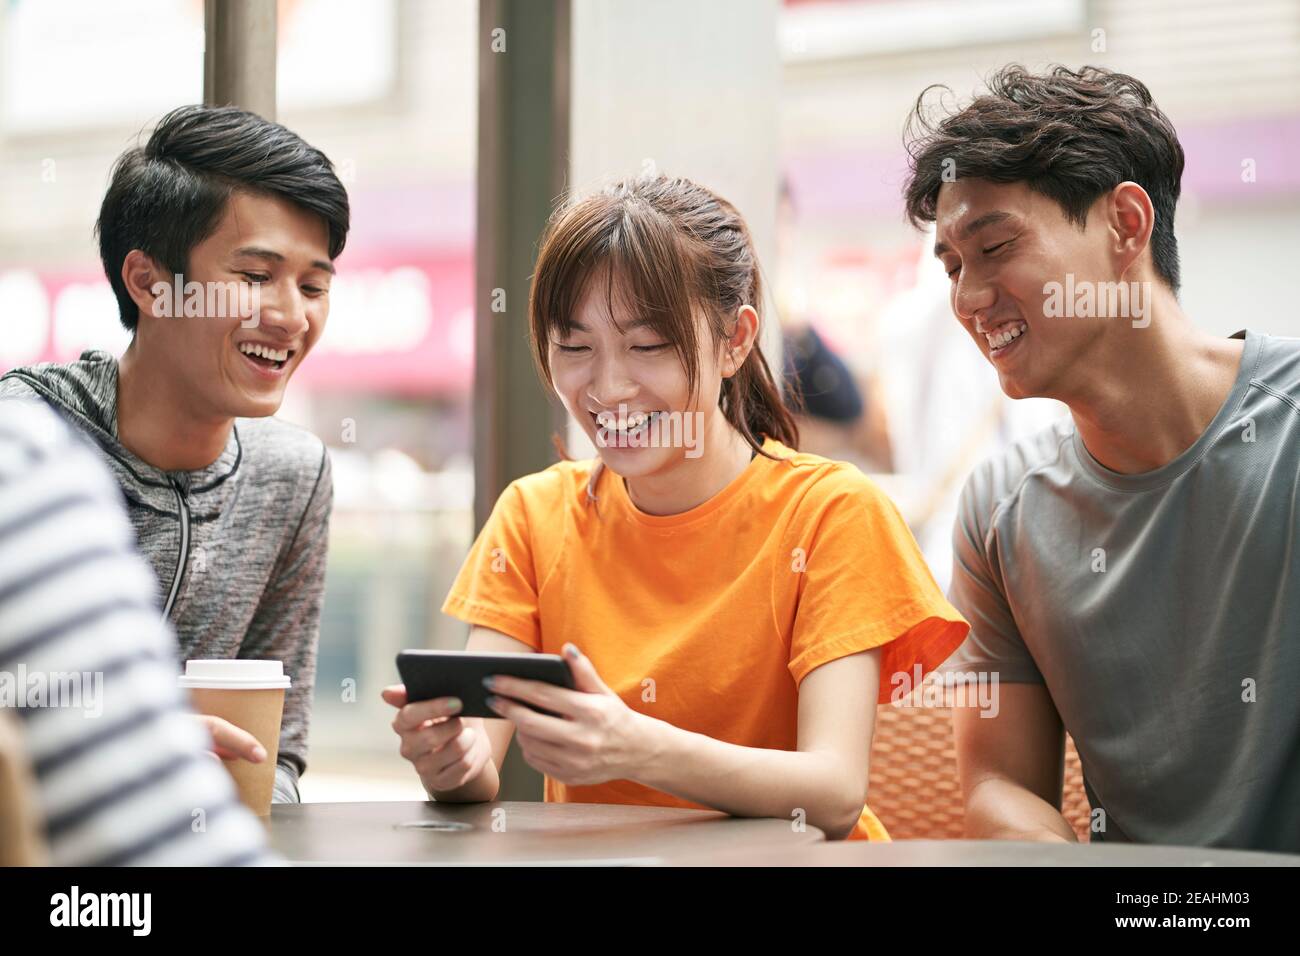 three young asian adults sitting in outdoor coffee shop using cellphone together Stock Photo